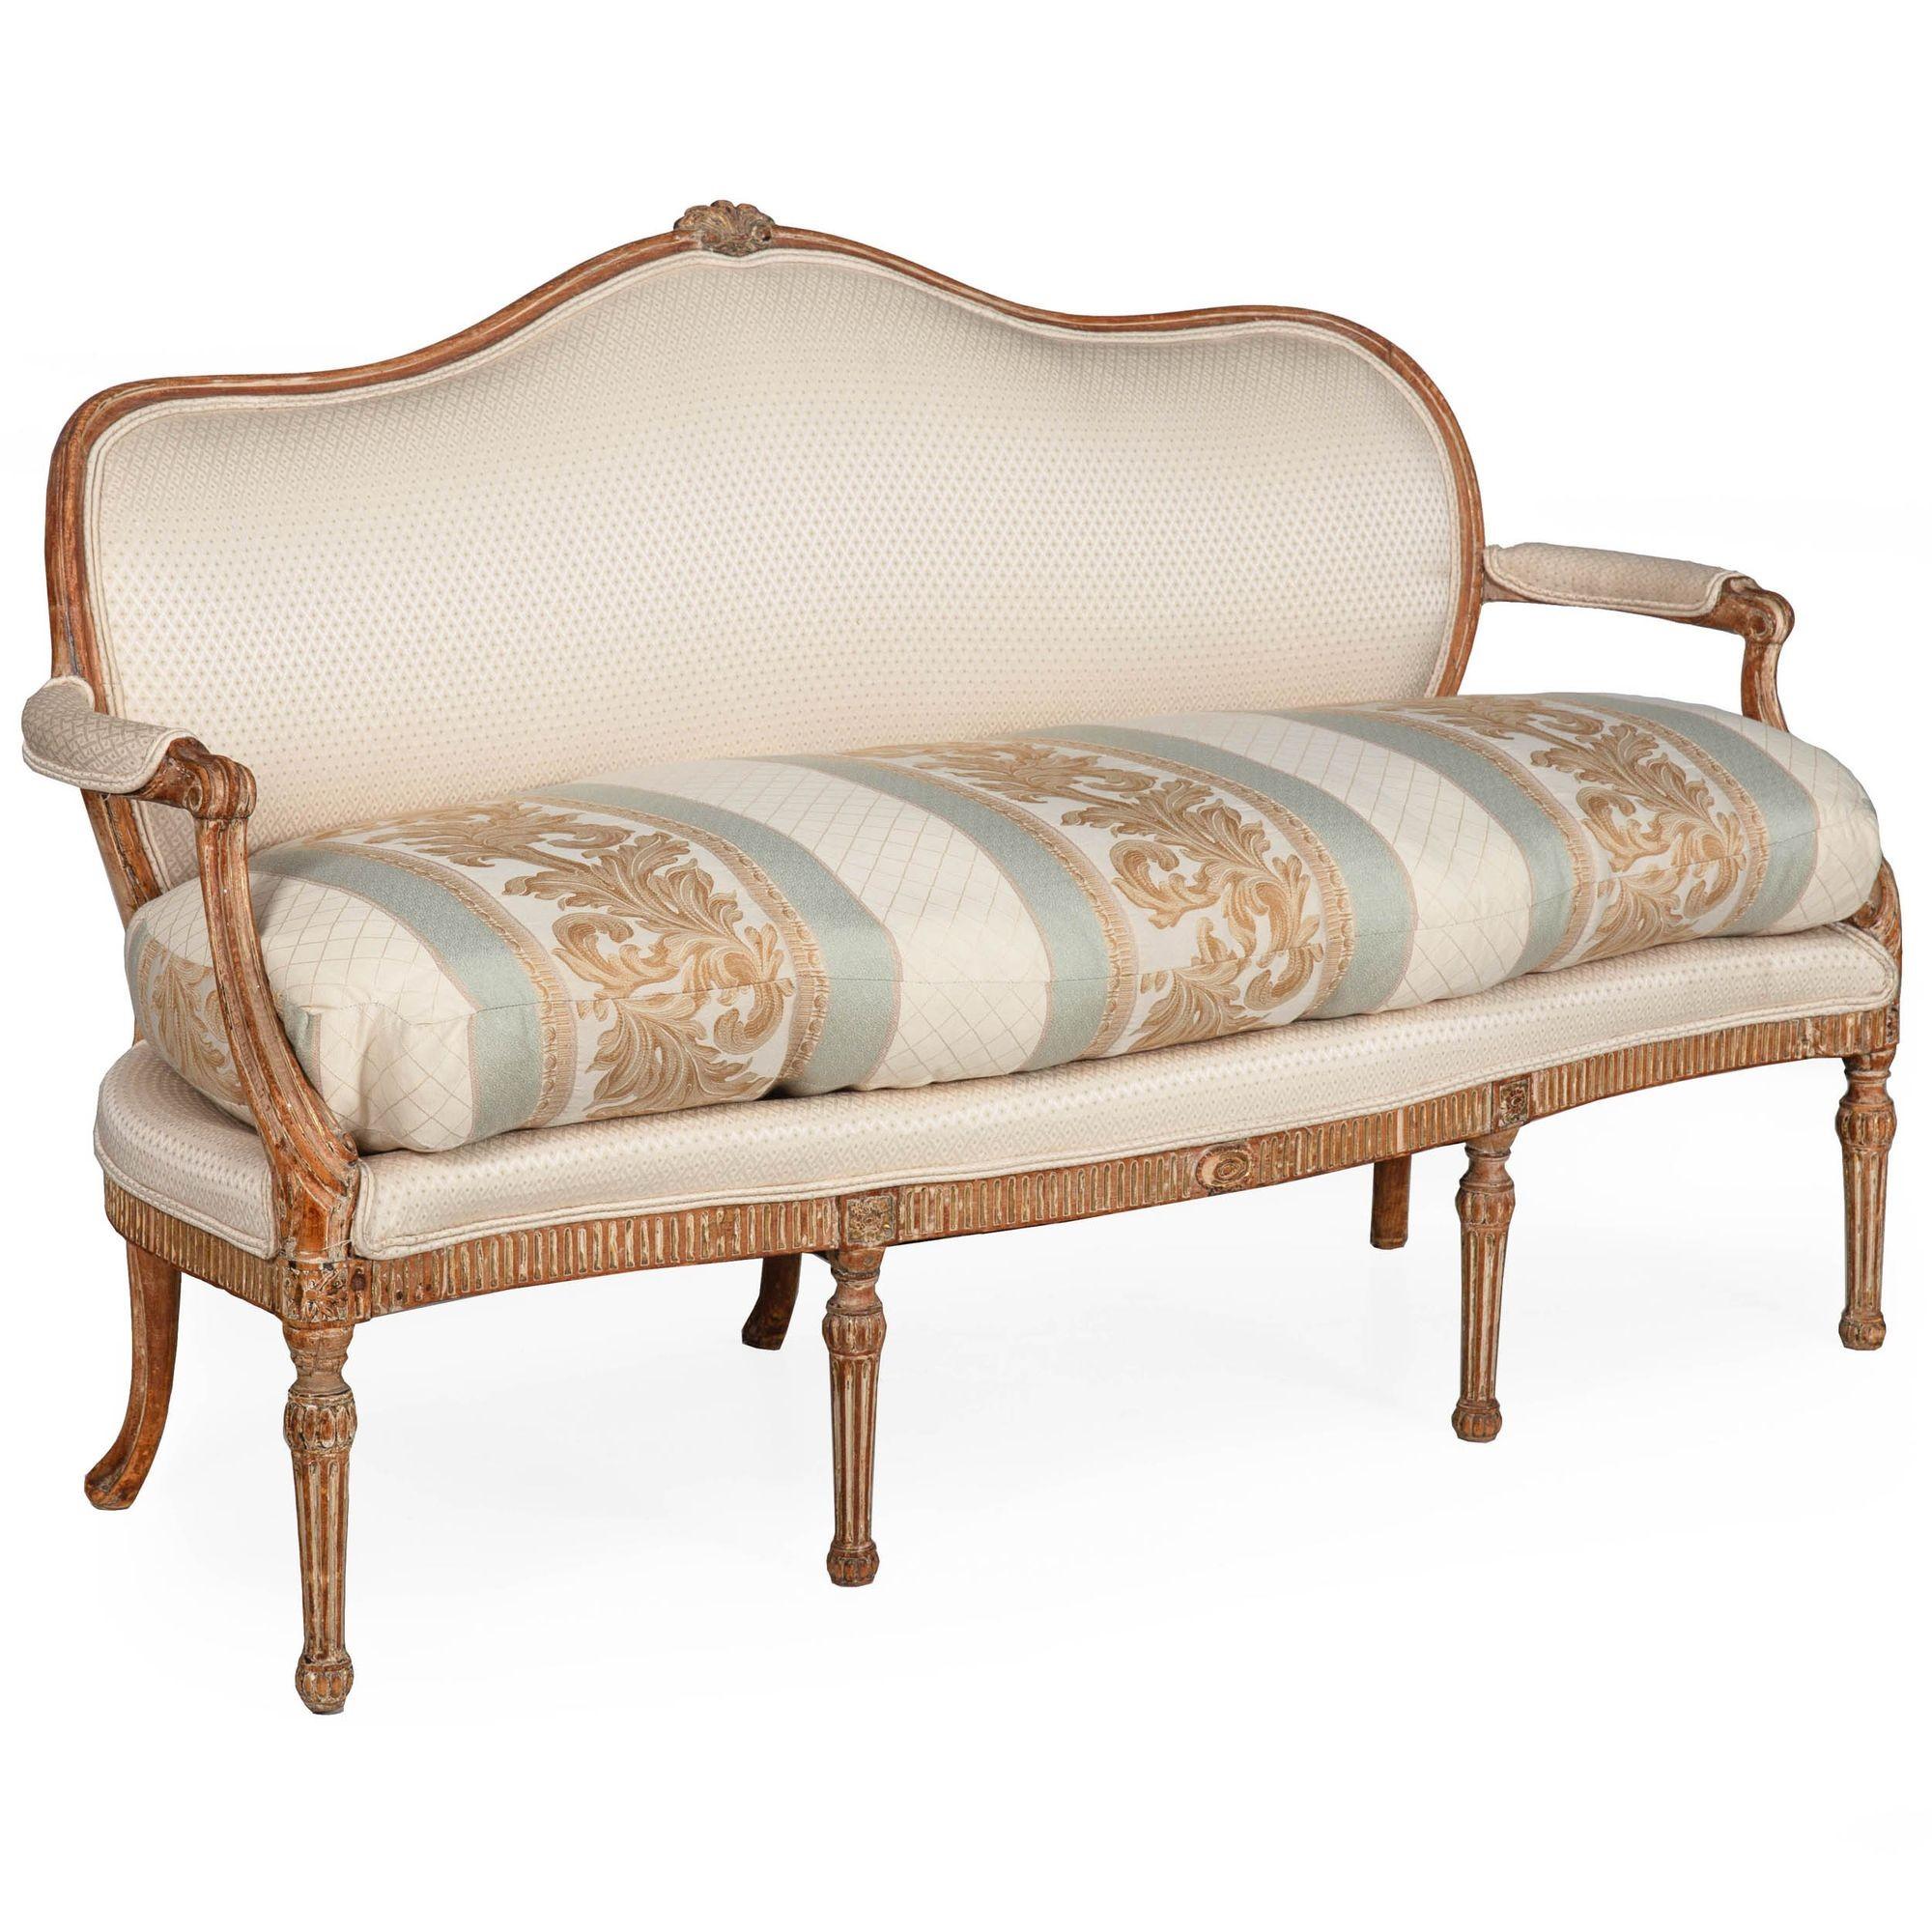 LOUIS XVI CARVED AND SCRUBBED PARCEL-GILT CANAPÉ
France, circa 1780  cambric not removed to examine for signatures
Item # 404GPQ12L

A lovely Louis XVI period canapé from the last quarter of the 18th century, the sofa features a worn aesthetic in